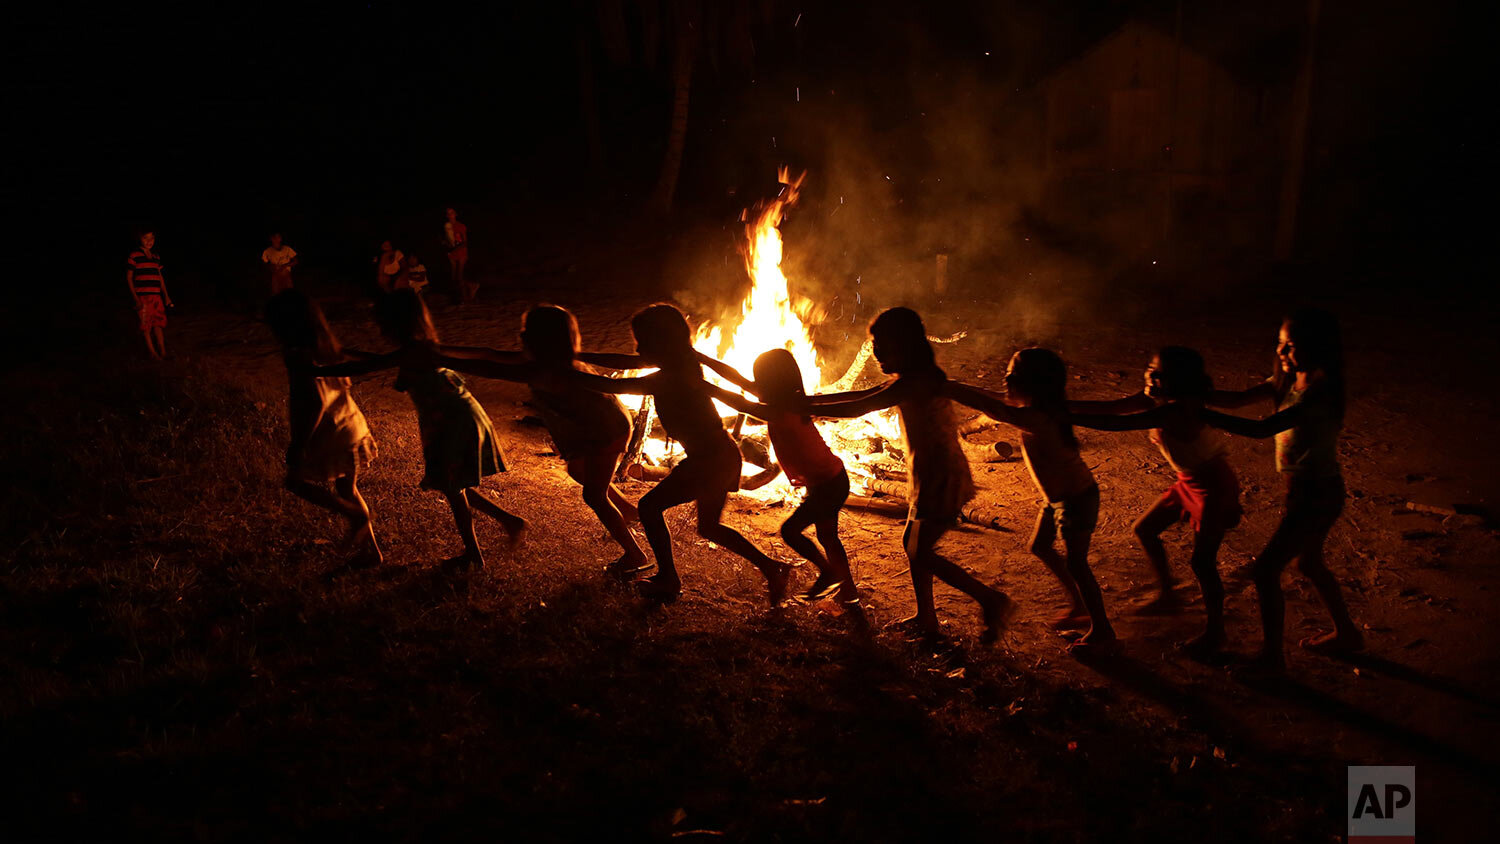  Tenetehara Indigenous children play around a campfire during a festival in the Alto Rio Guama Indigenous Reserve, near Paragominas, in the northern Brazilian state of Para, Monday, Sept. 7, 2020. (AP Photo/Eraldo Peres) 